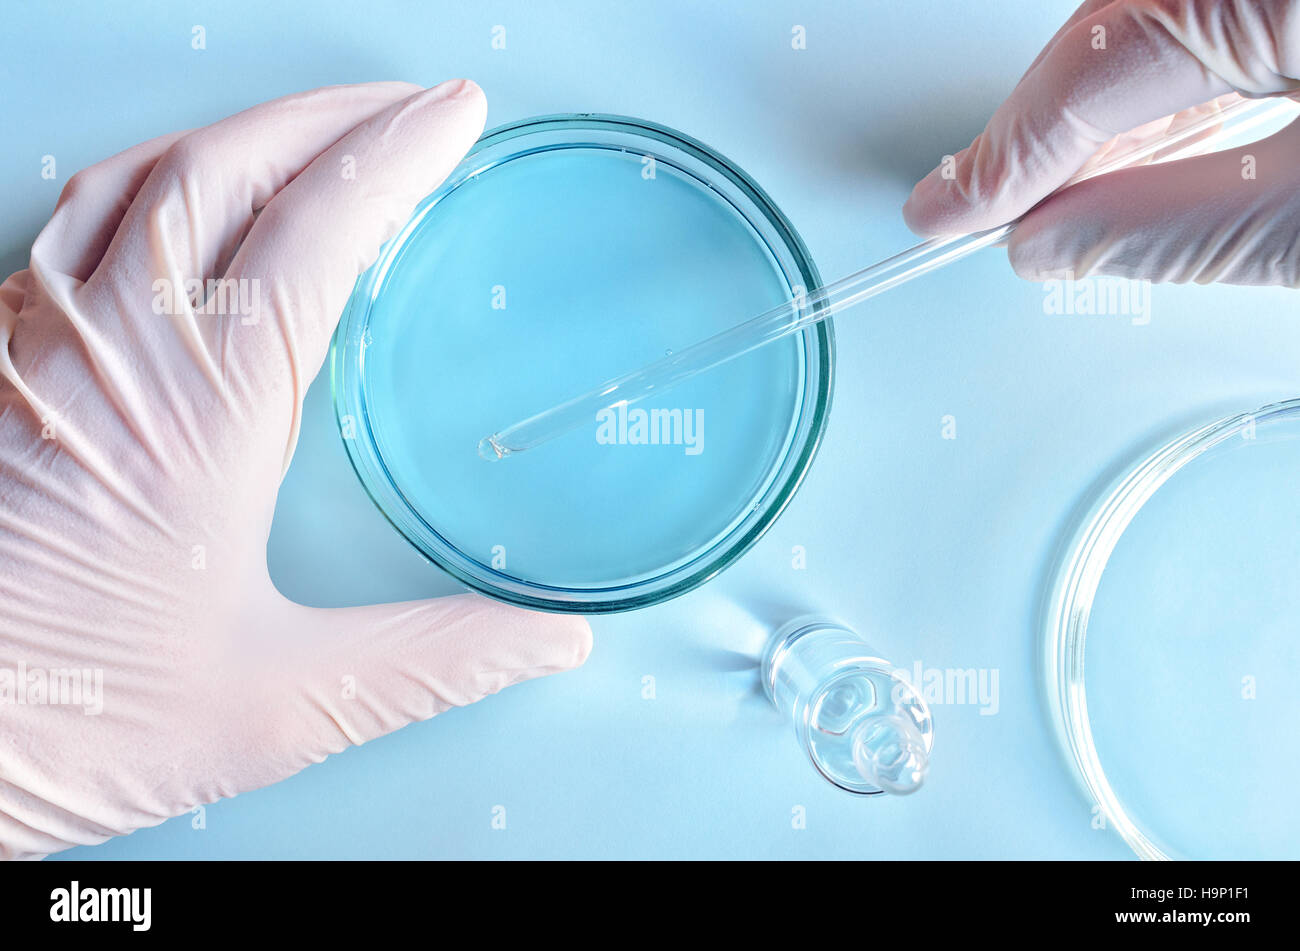 Chemical research in Petri dishes on blue background. Researcher preparing color plates in a microbiology laboratory. Hand of a technician inoculating Stock Photo